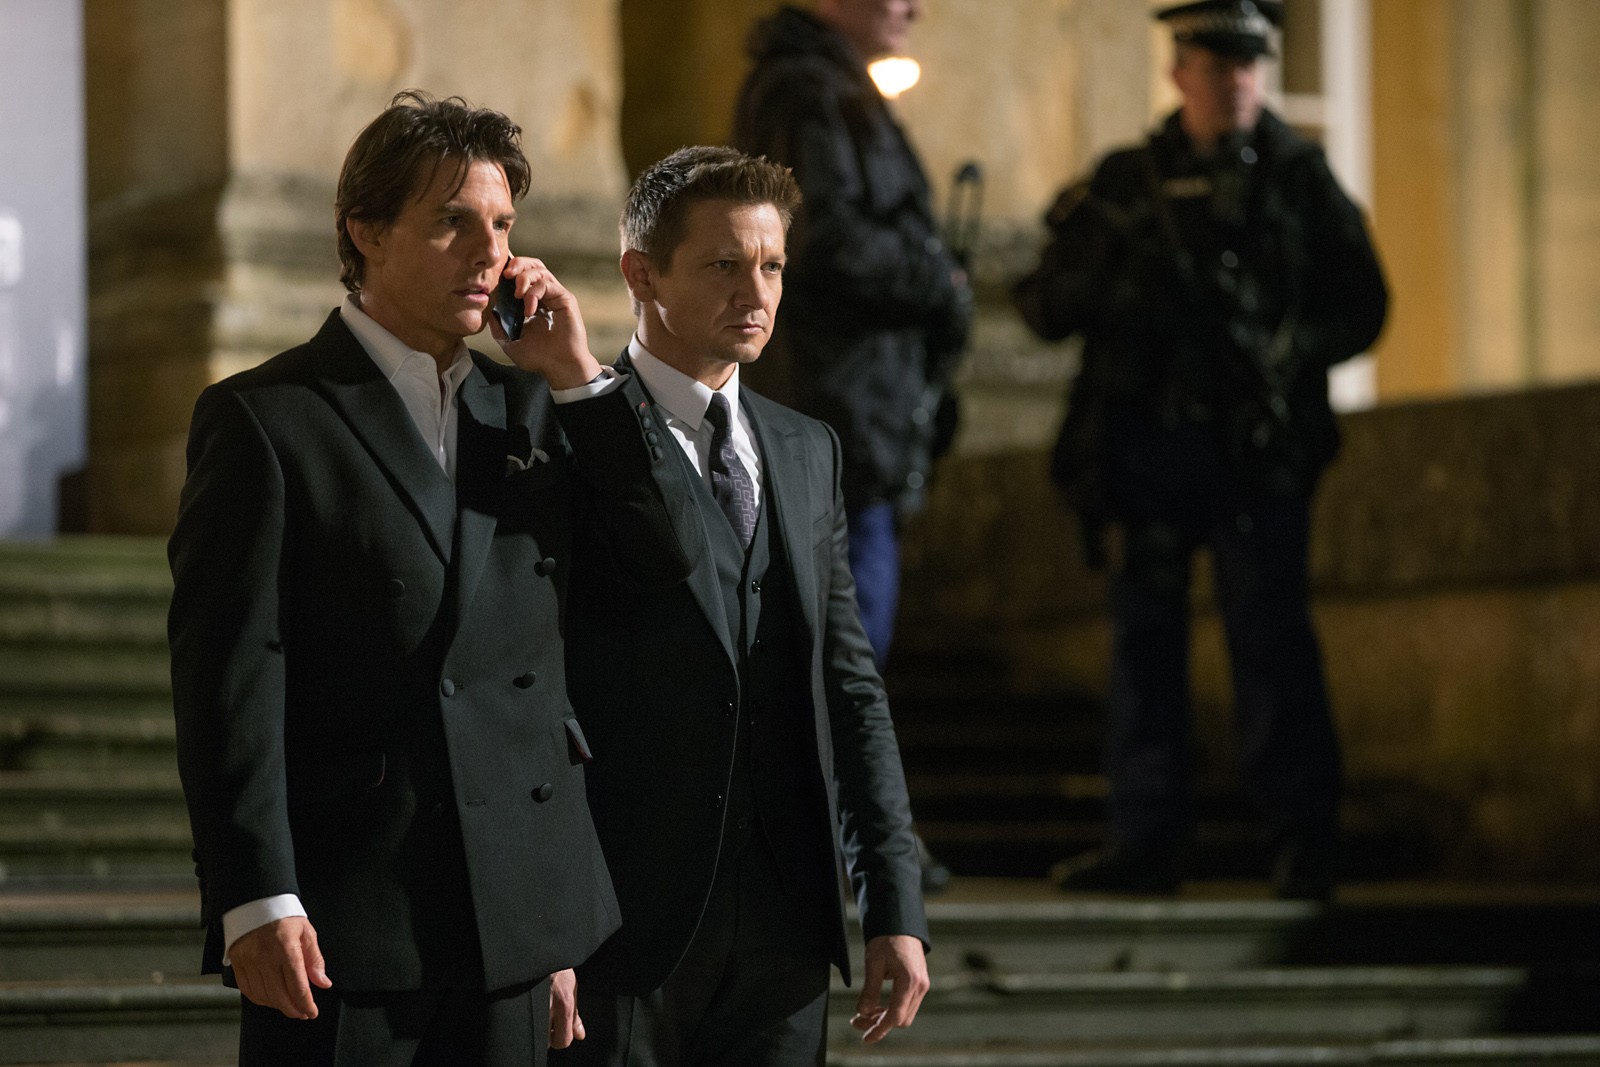 Tom Cruise and Jeremy Renner as Ethan Hunt and William Brandt in Mission: Impossible 4